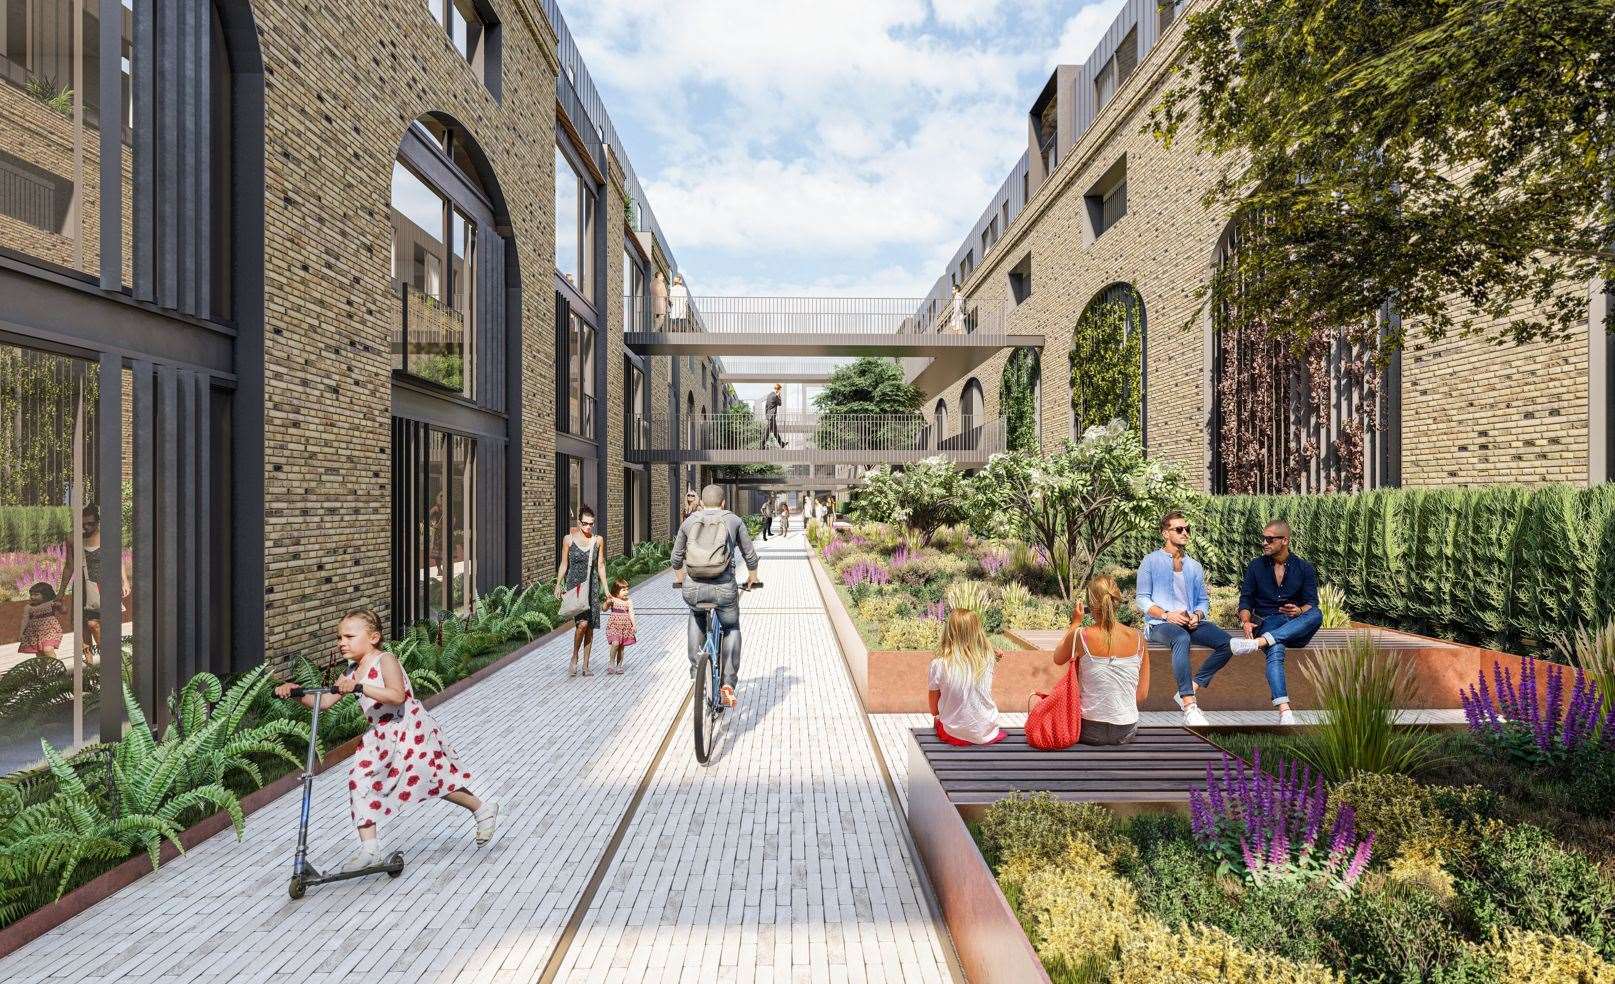 The project, set for Newtown railway works in Ashford, was approved in 2020